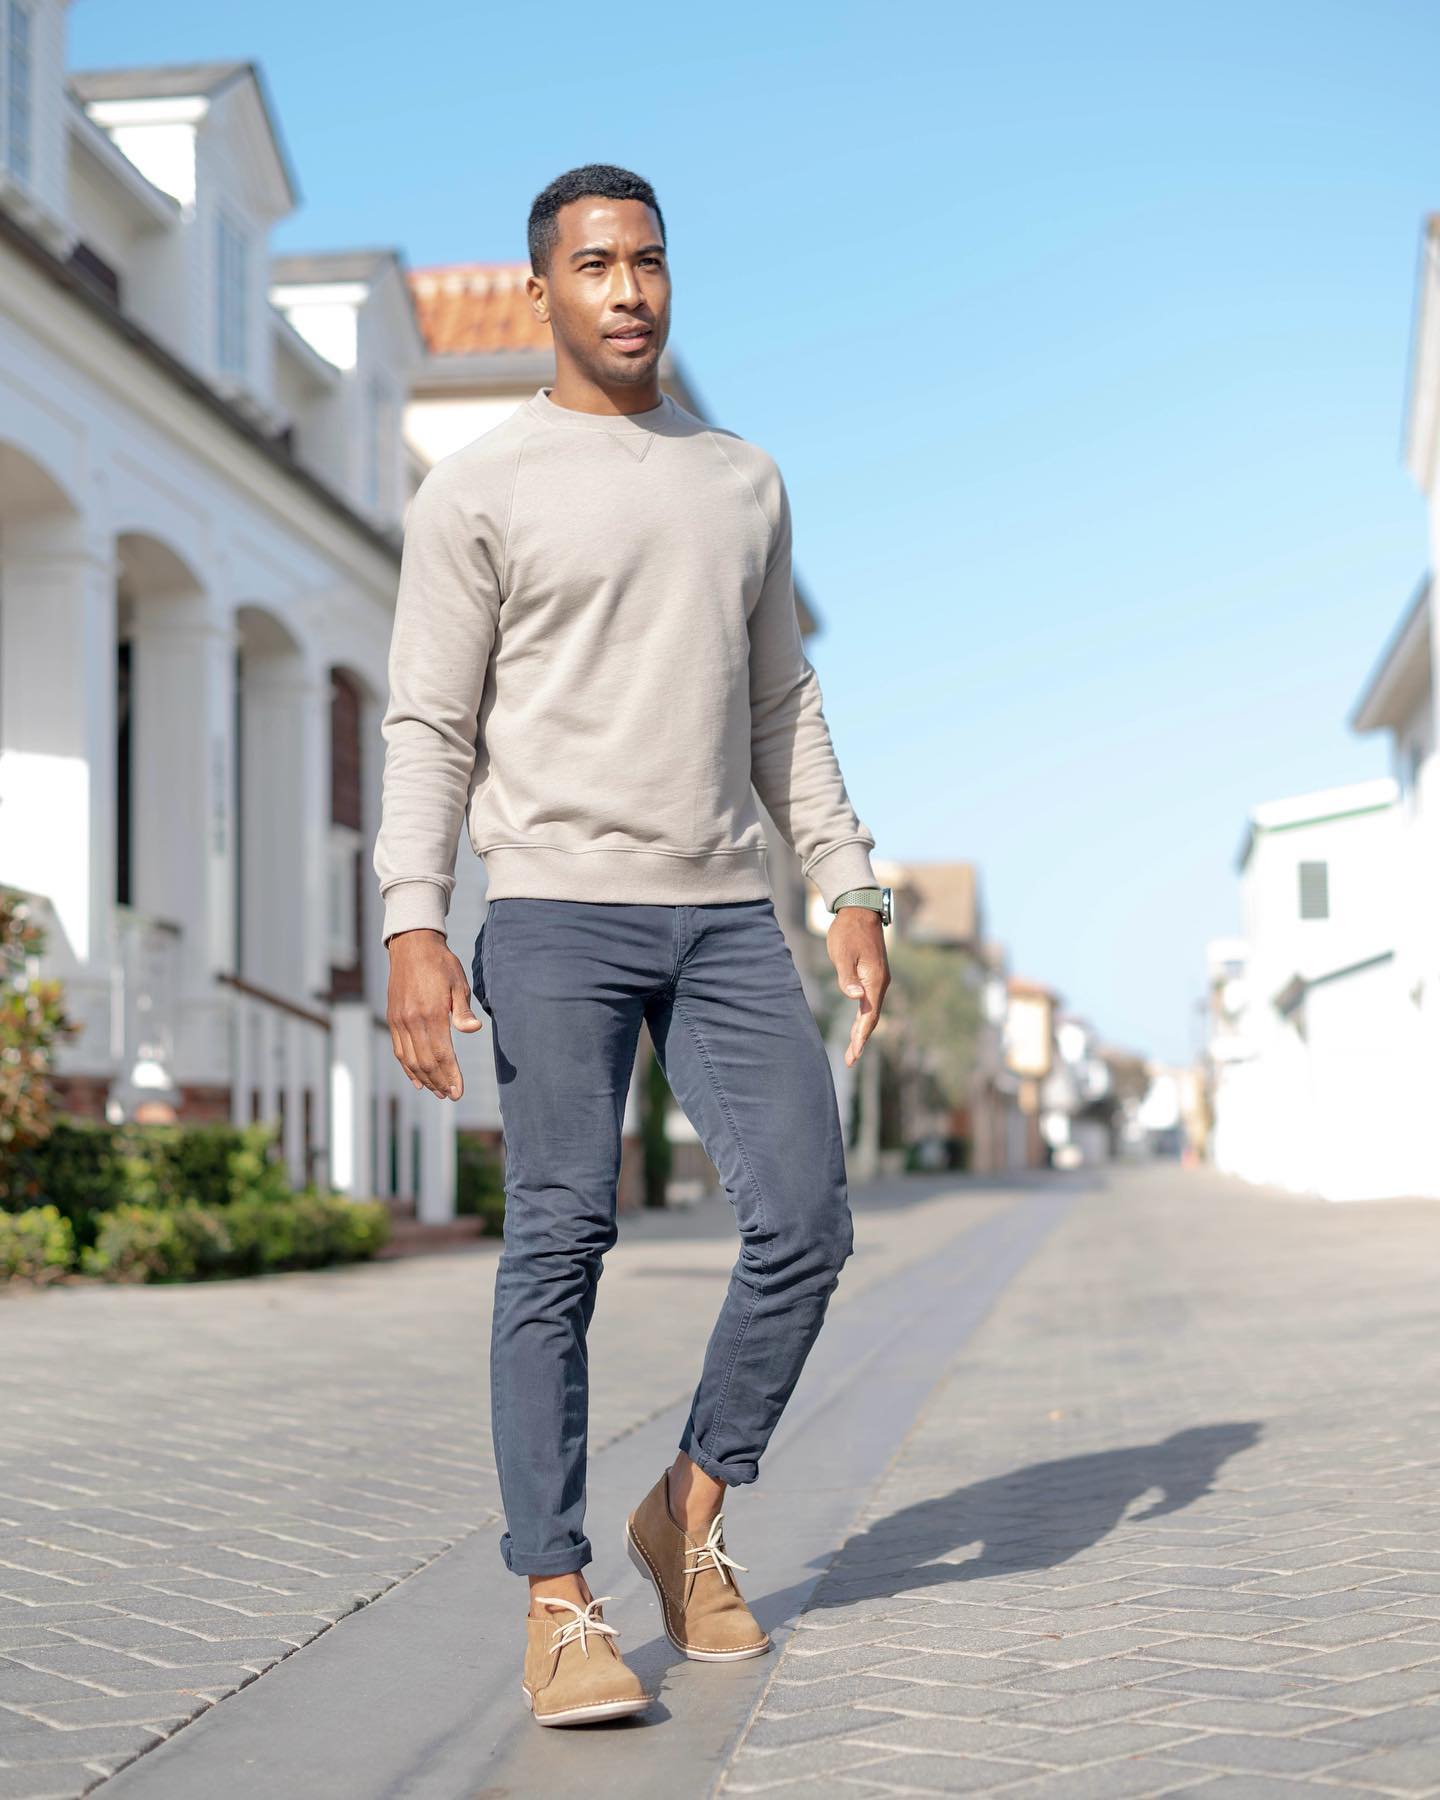 GIVEAWAY closed💥
Stylish Athlete @joshdixon is rocking Veldskoens & YOU can too. Congrats @baner10 you Won! 
.
Head to his Instagram to enter & WIN a pair of Veldskoen Heritage of your choice! #giveawaycontest